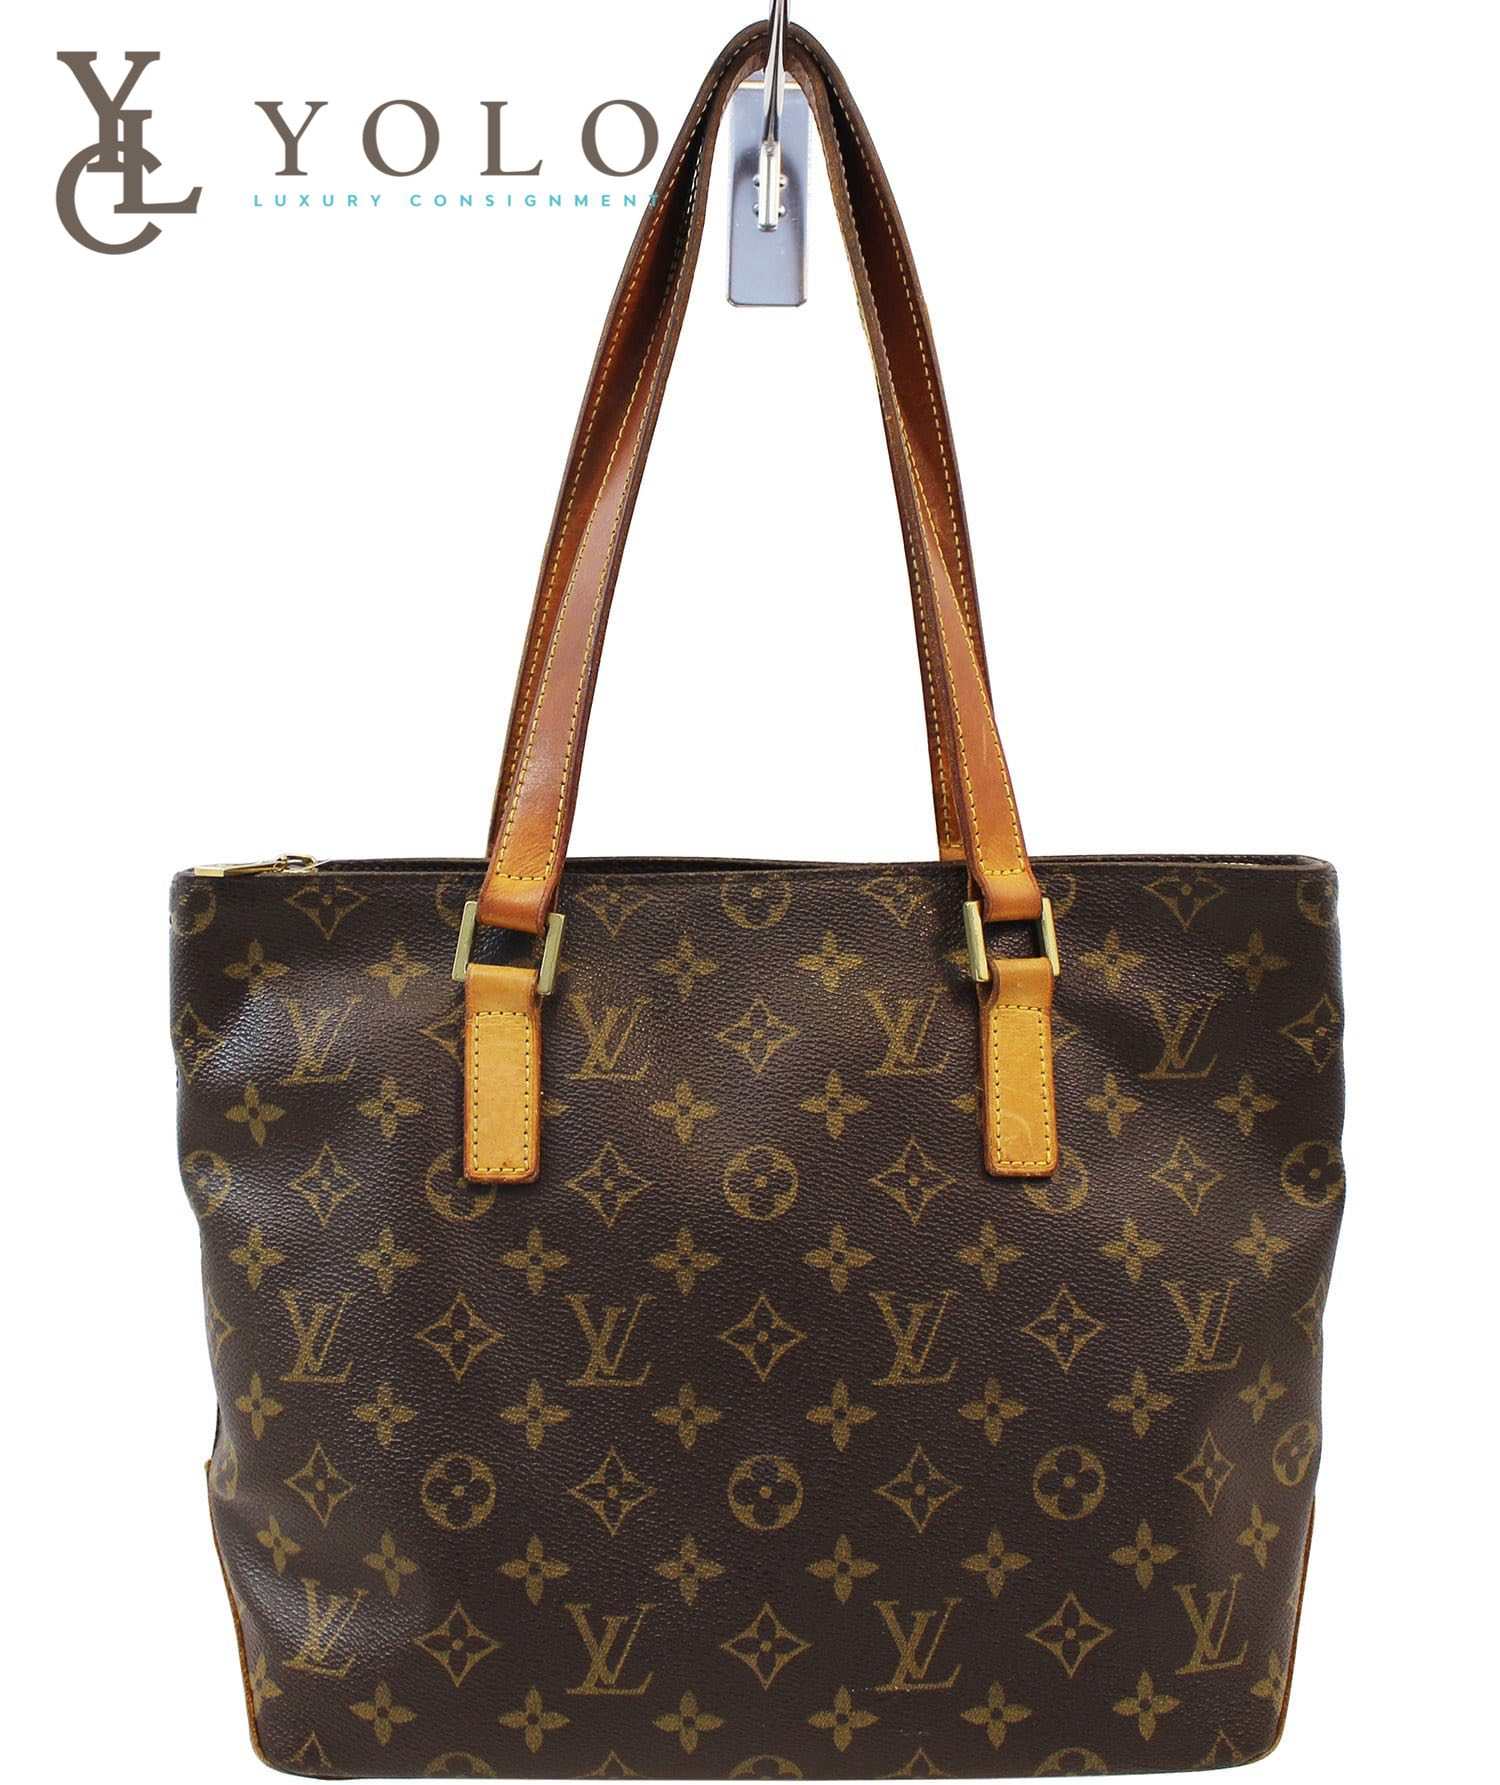 Is this Louis Vuitton handbag real and what type of bag? : r